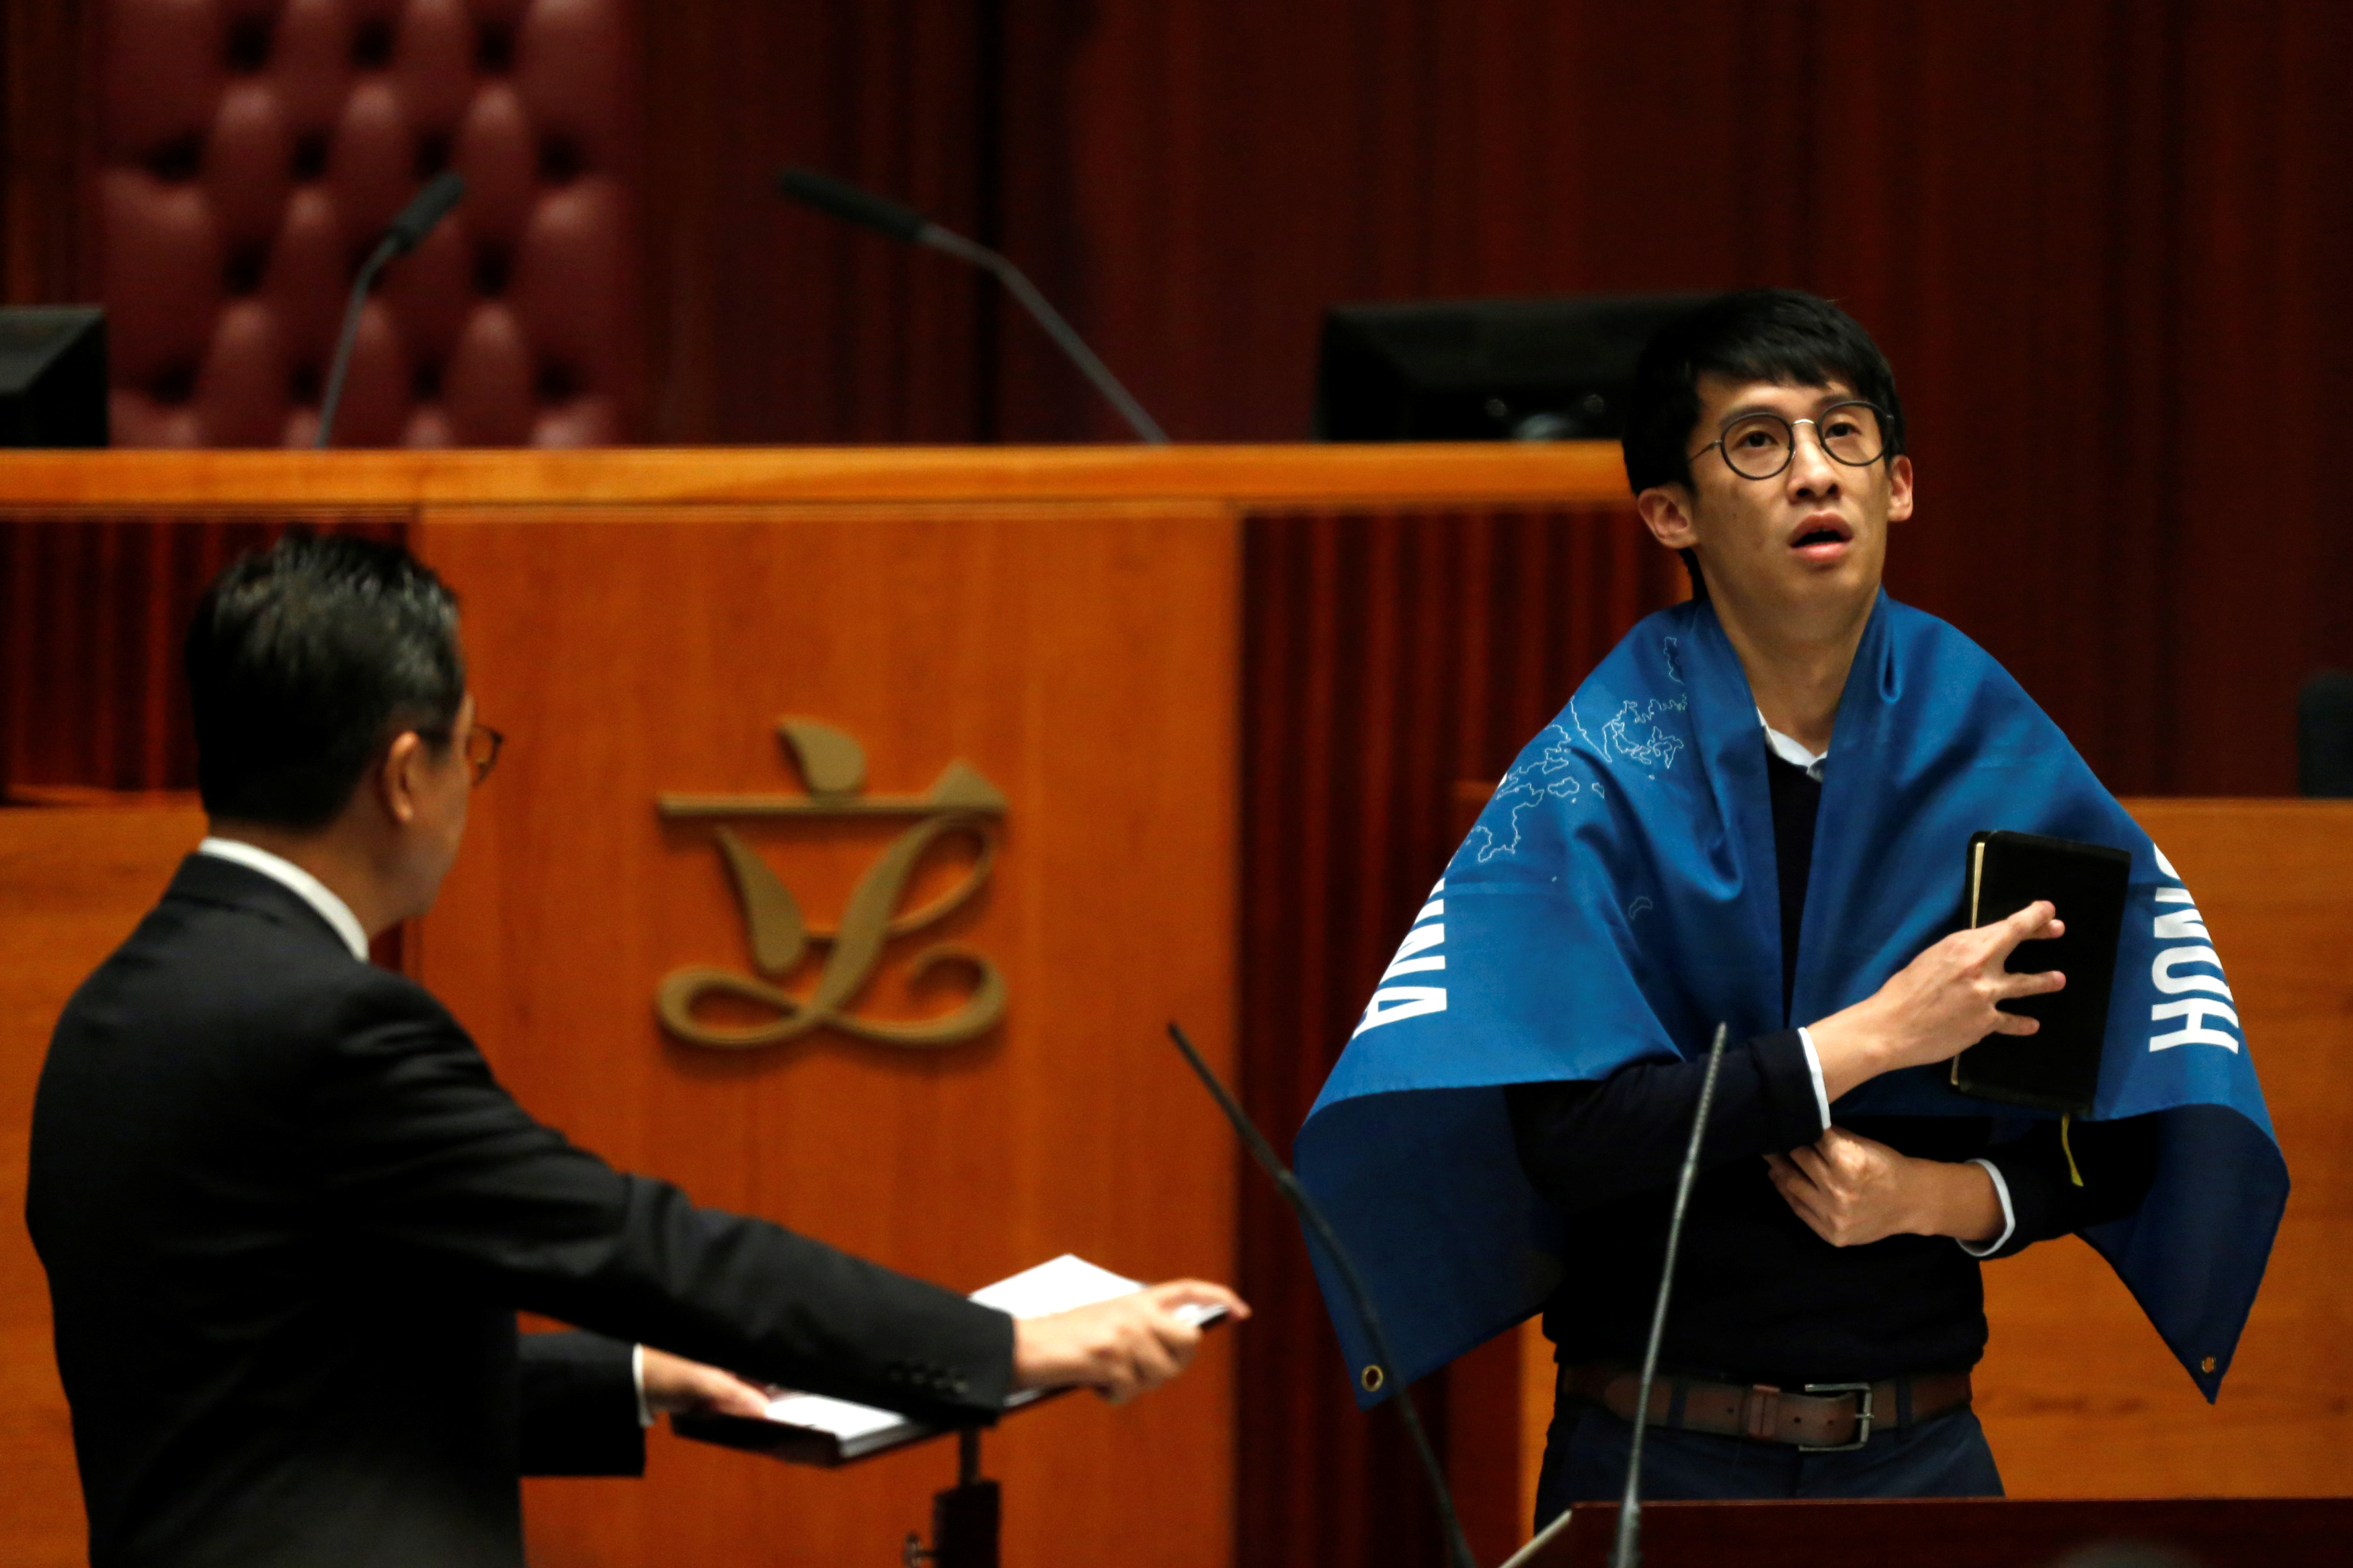 Newly elected lawmaker Sixtus "Baggio" Leung, right, wraps himself in a banner that says "Hong Kong Is Not China" while taking oath at the Legislative Council in Hong Kong on Oct. 12, 2016 (Bobby Yip—Reuters)